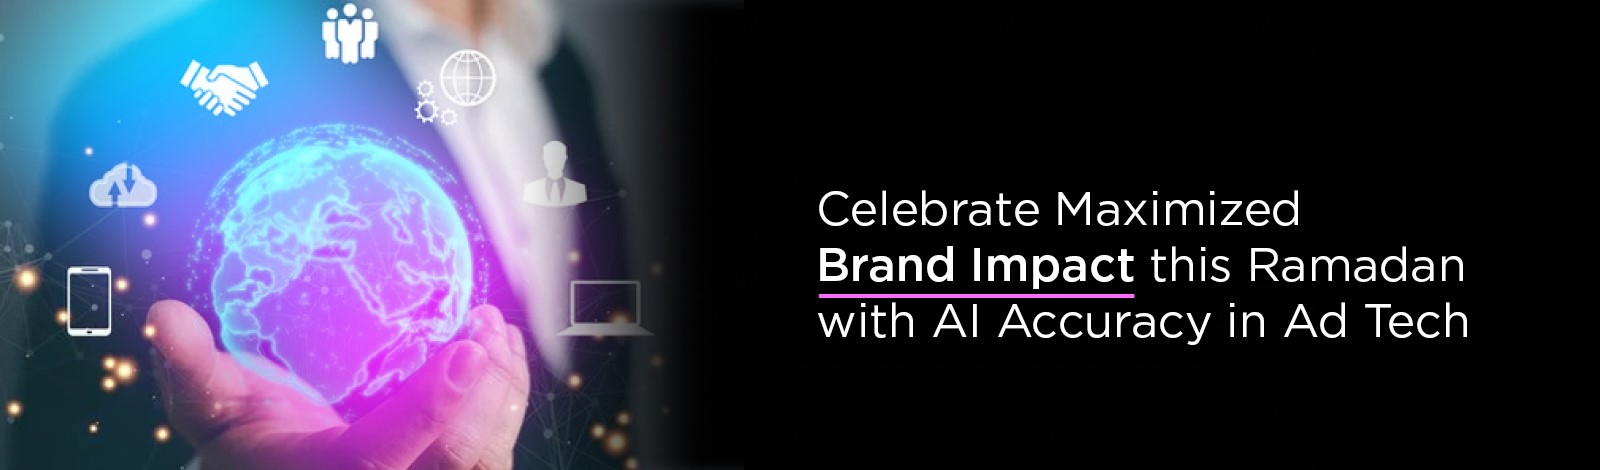 Celebrate maximized brand impact this Ramadan with AI accuracy in ad tech 